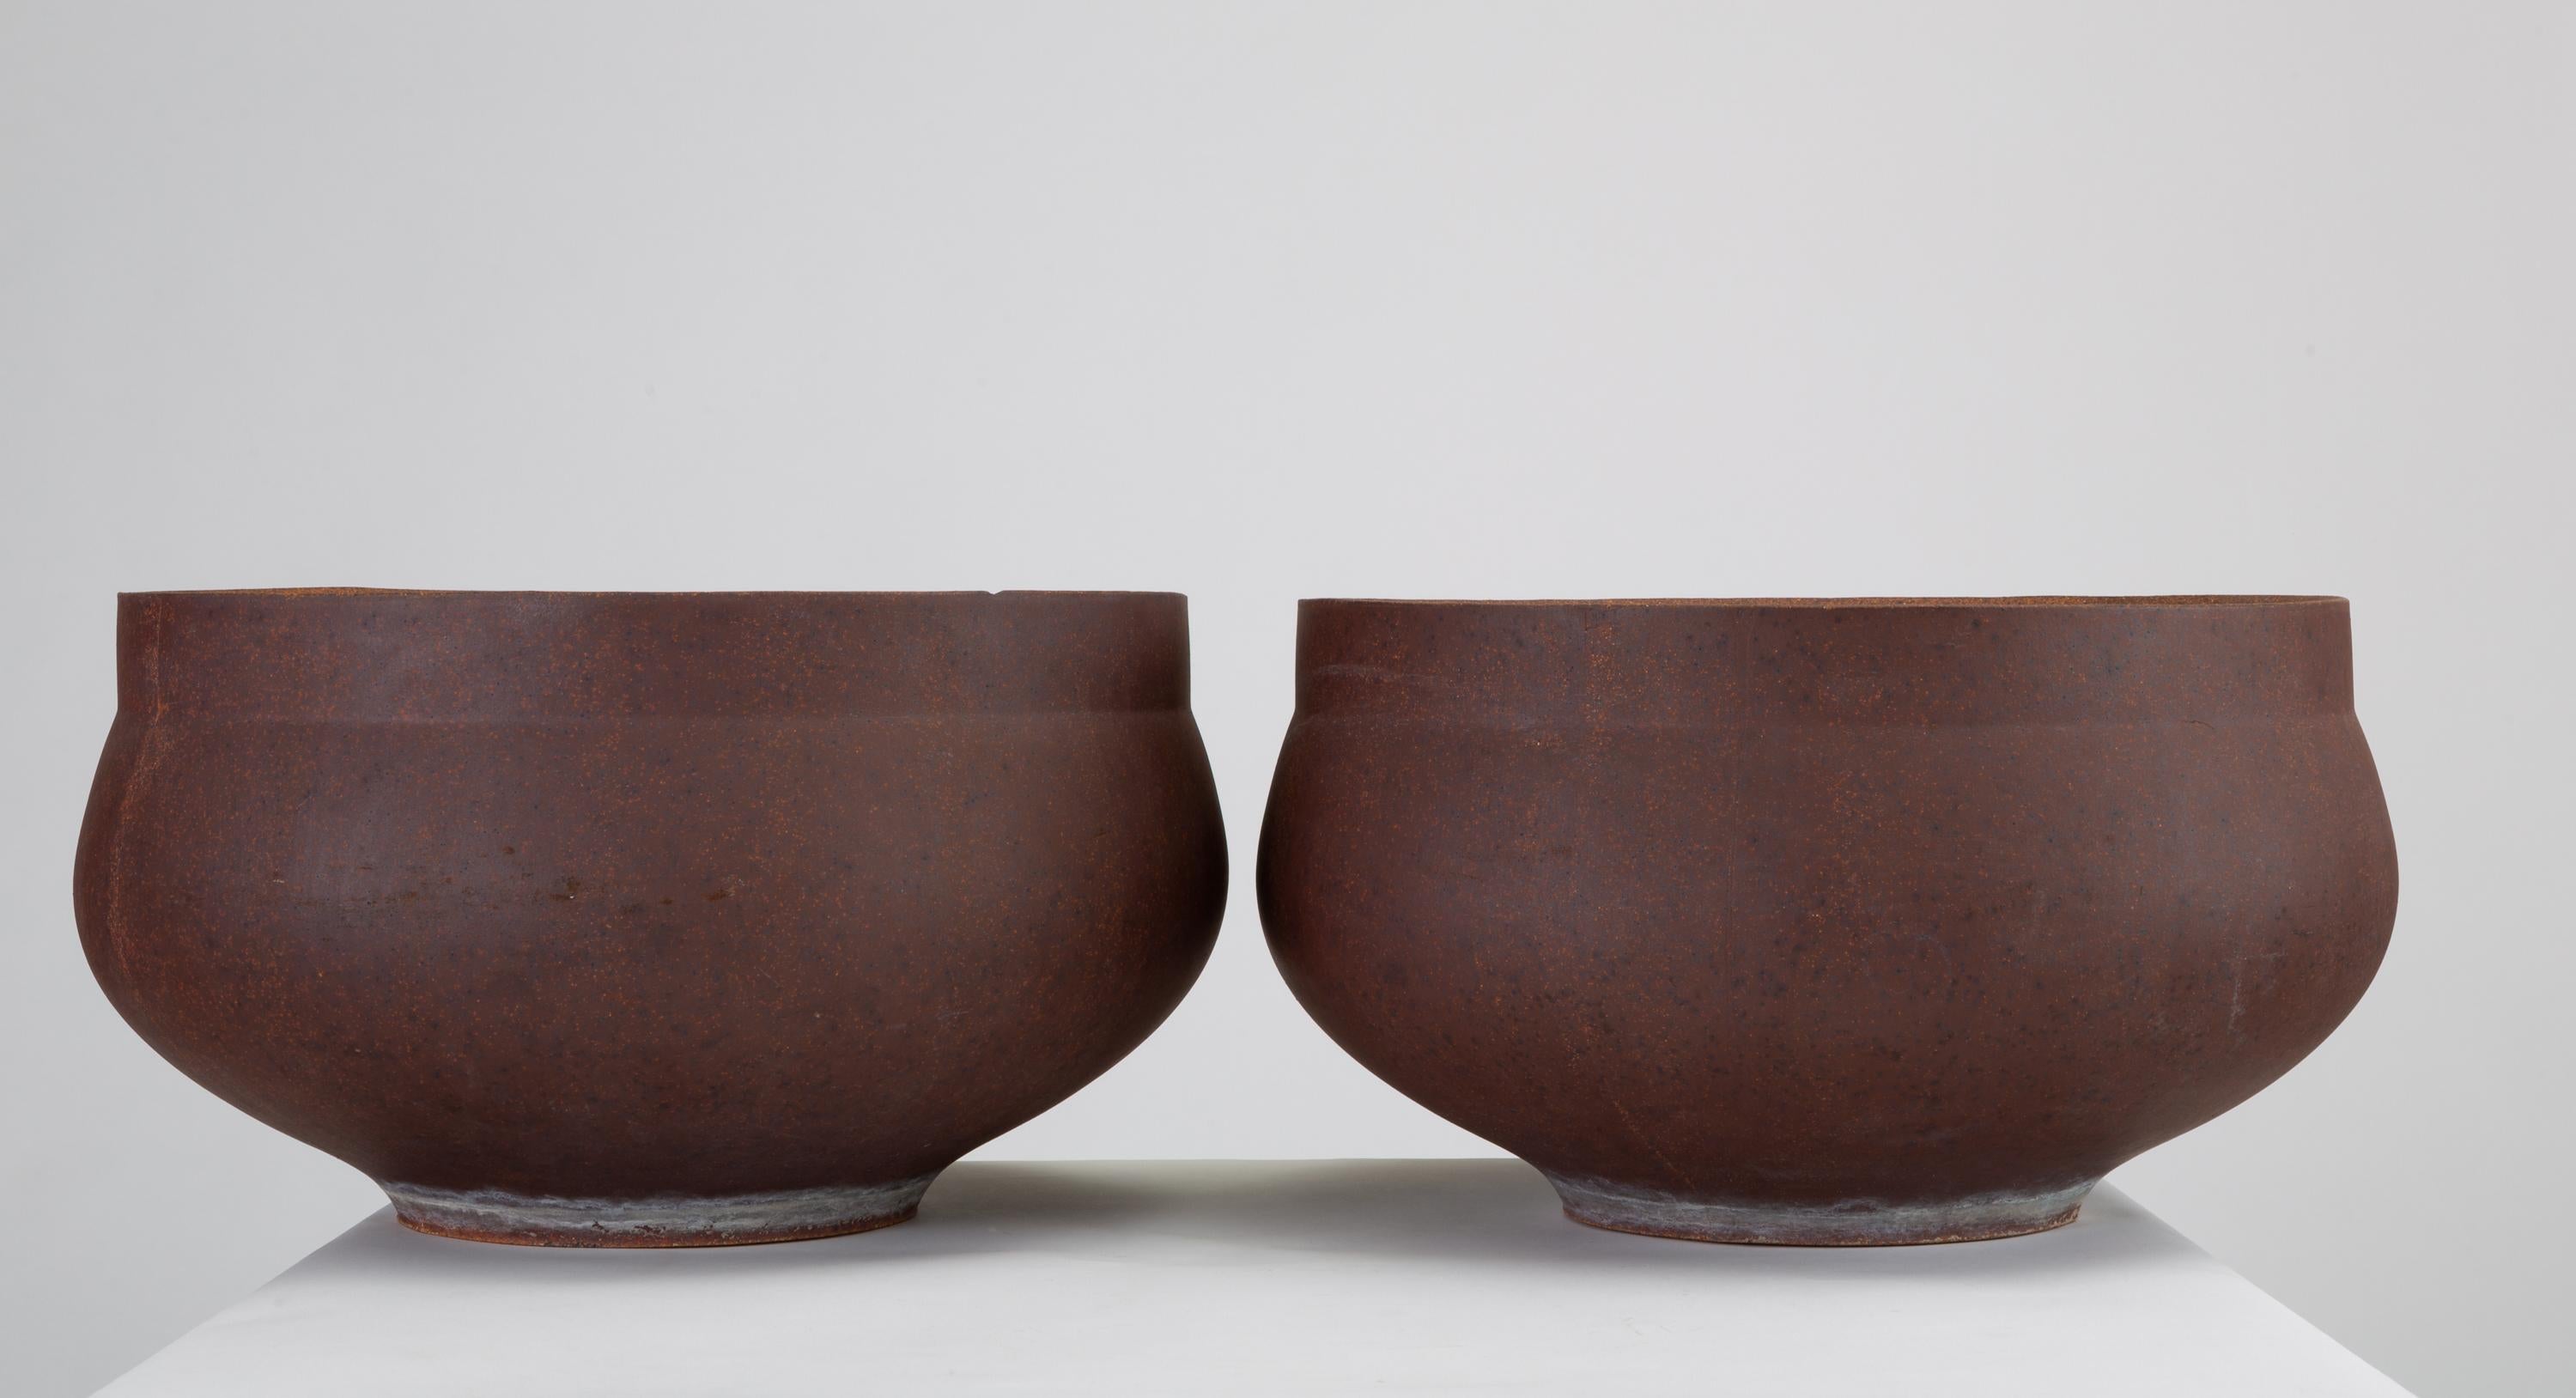 A pair of ceramic bowl planters from David Cressey's pro/artisan collection for Architectural Pottery. The unglazed planters have slightly bowed sides and a flattened lip. Listed price is for the pair of planters, though we have an additional single